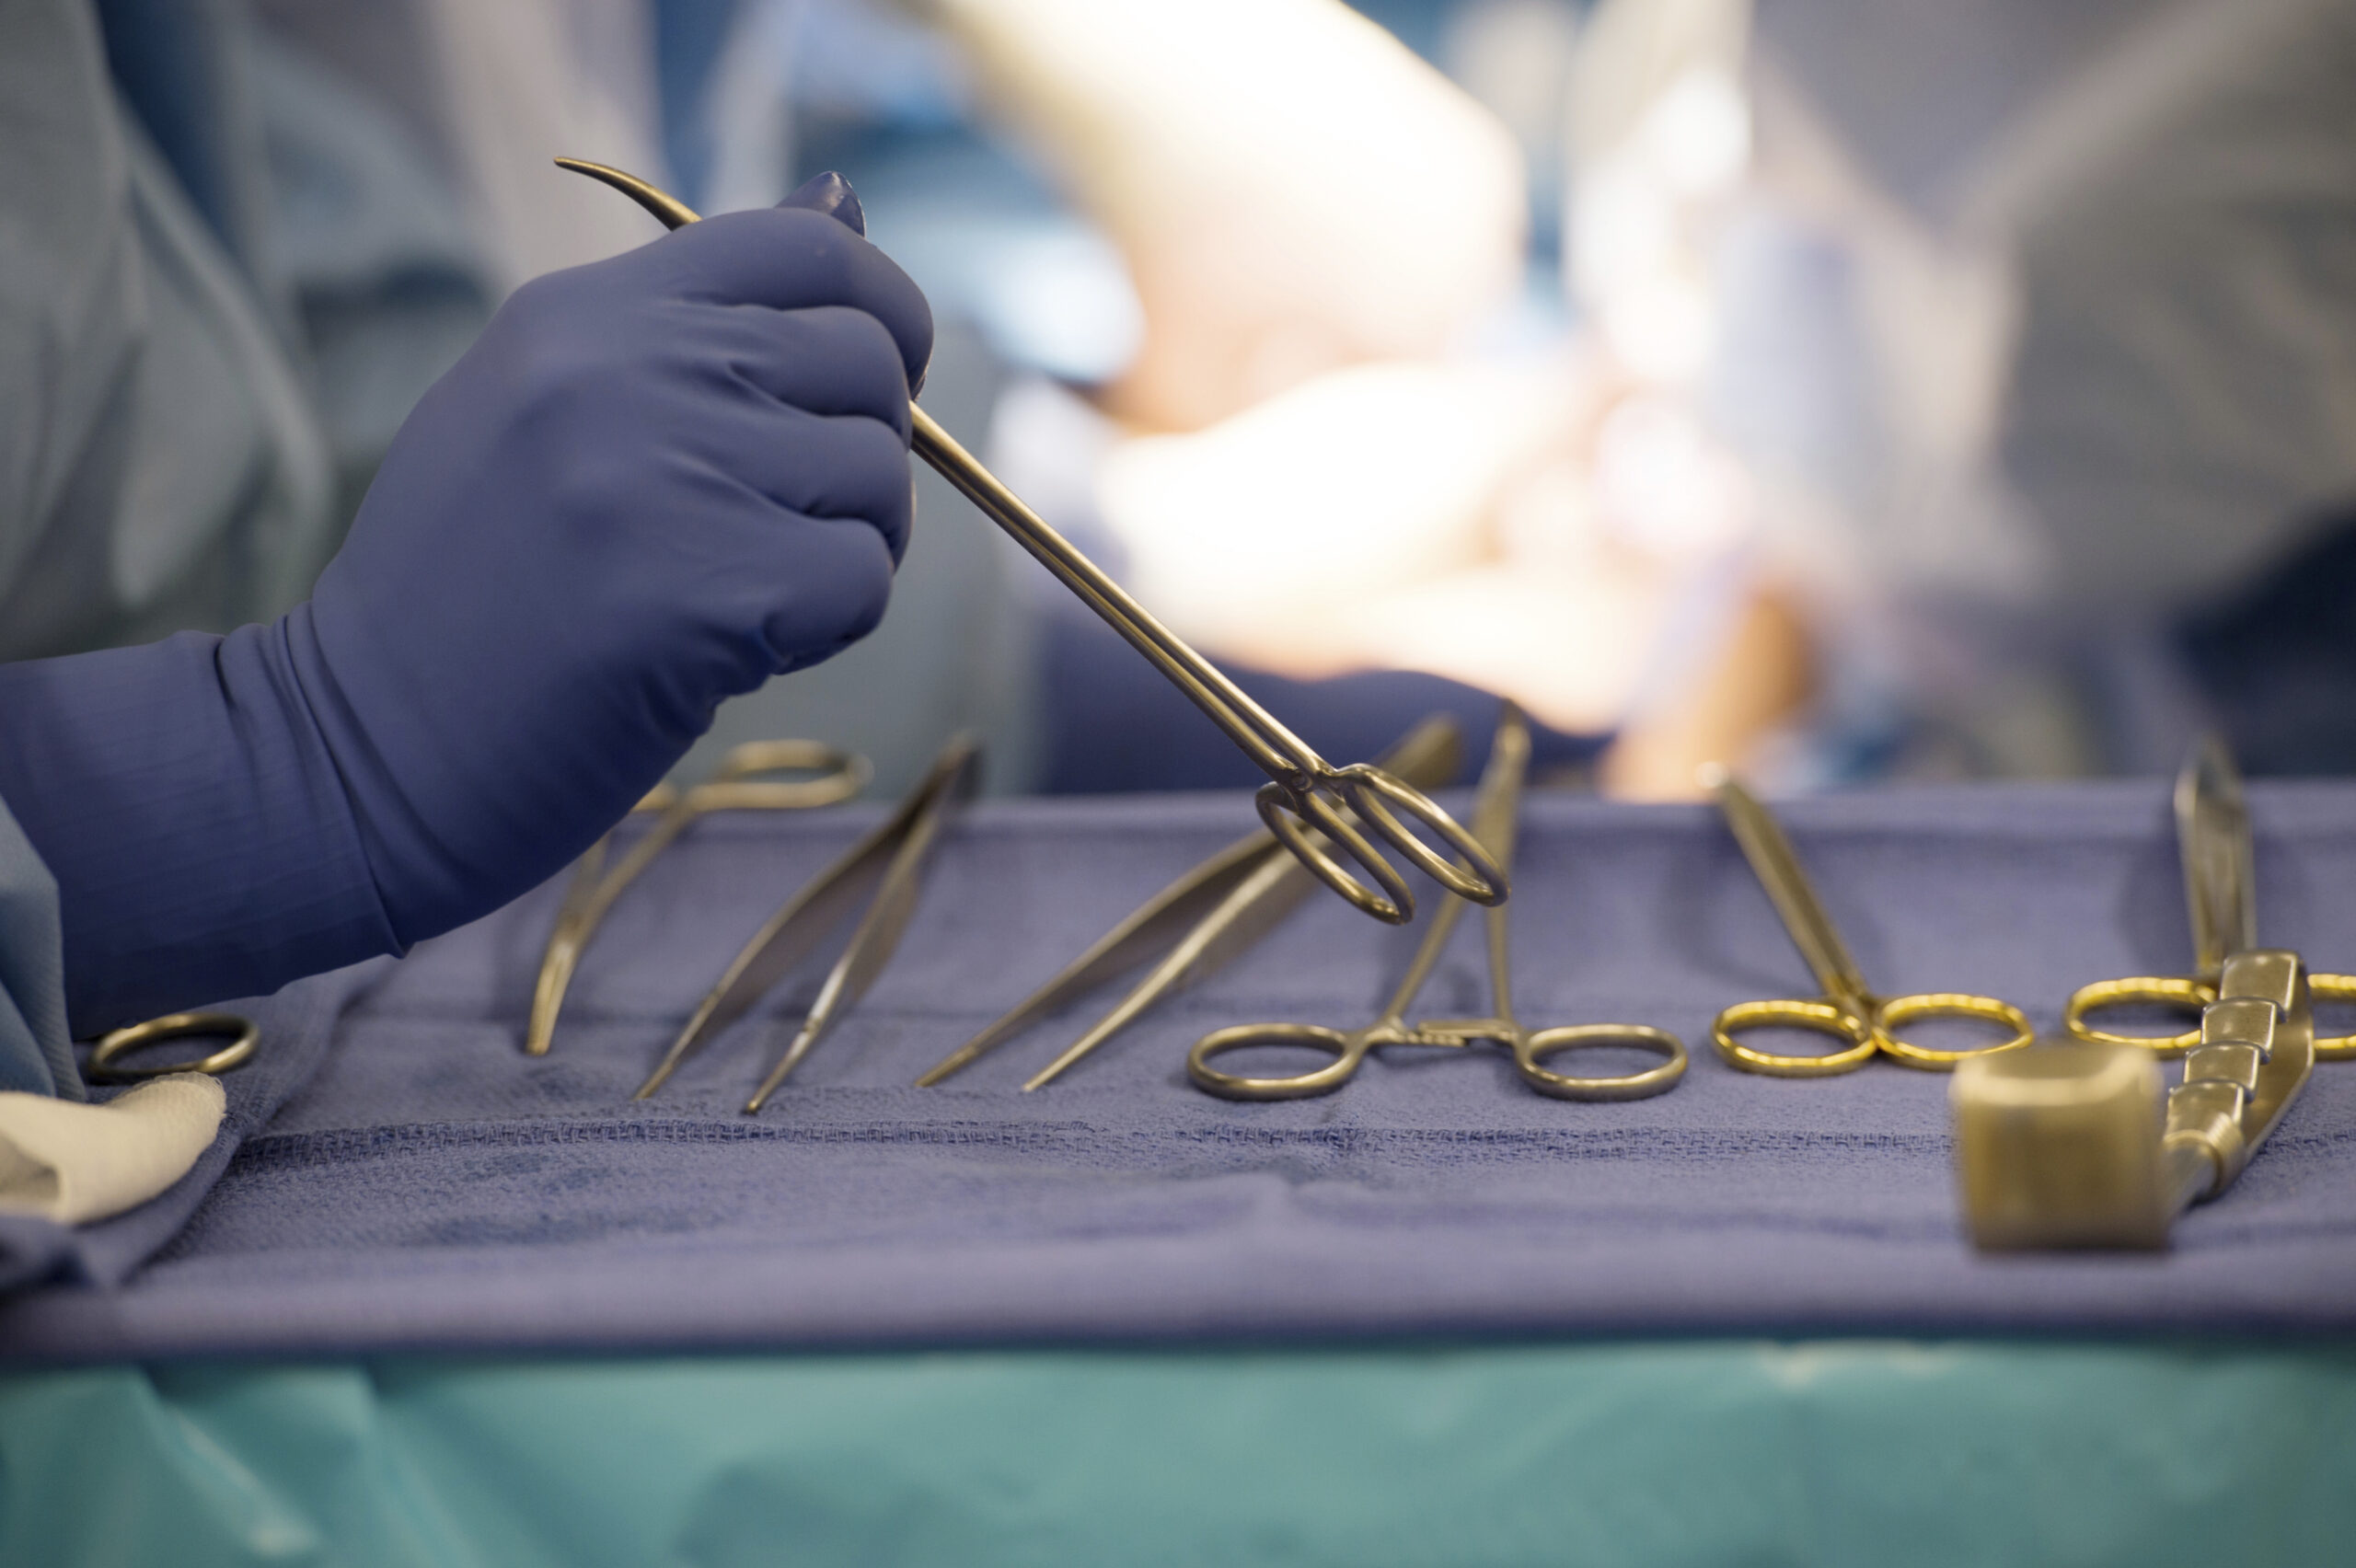 FILE - Surgical instruments are used during an organ transplant surgery at a hospital in Washington on Tuesday, June 28, 2016. The U.S. counted its millionth organ transplant on Friday, Sept. 9, 2022, a milestone that comes at a critical time for Americans still desperately waiting for that chance at survival. (AP Photo/Molly Riley)